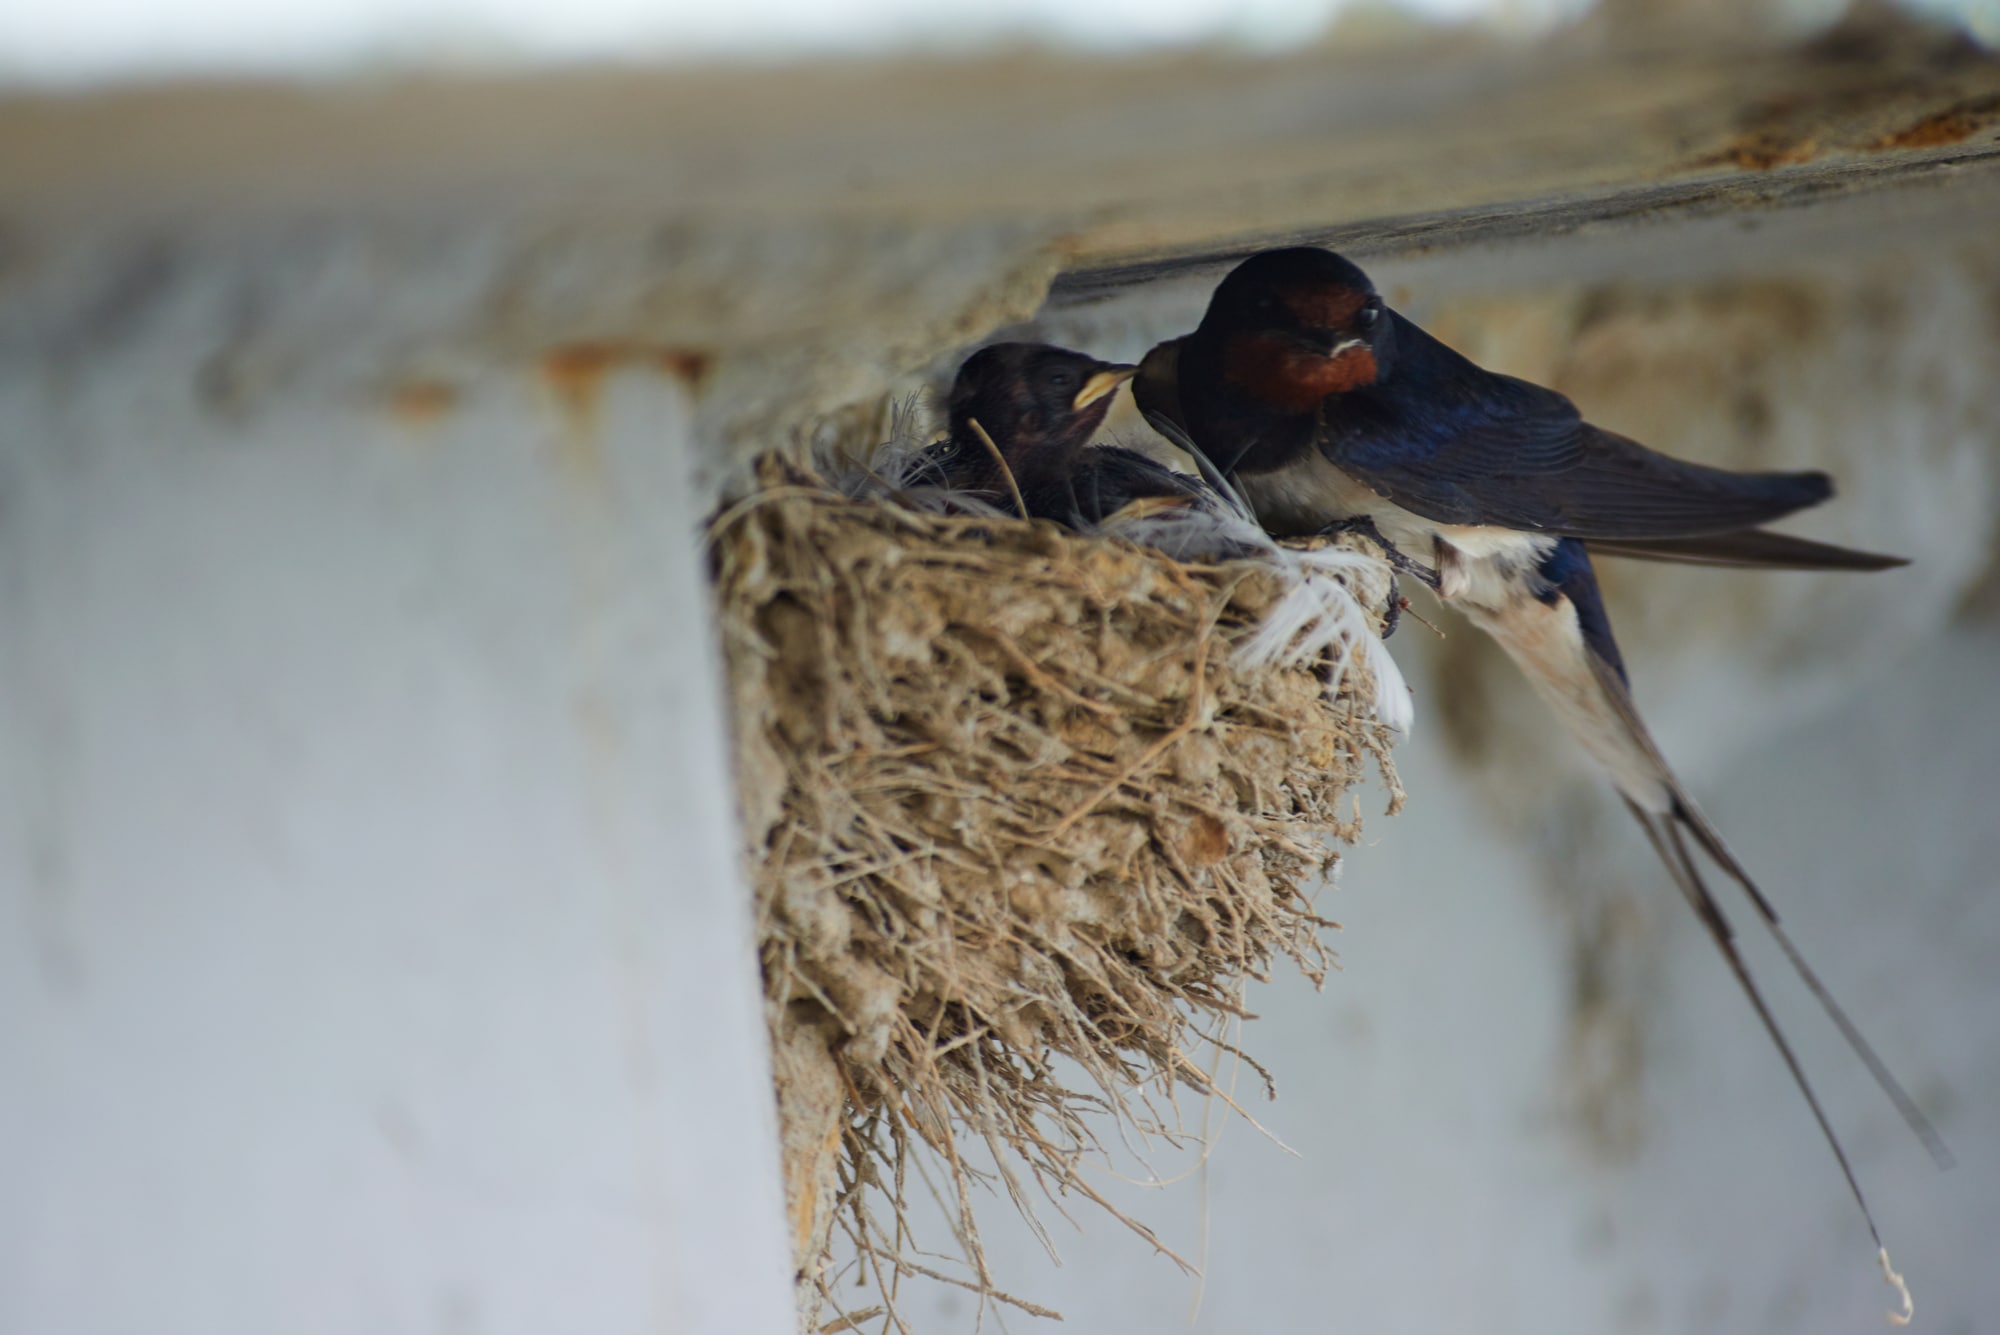 Nest of swallows